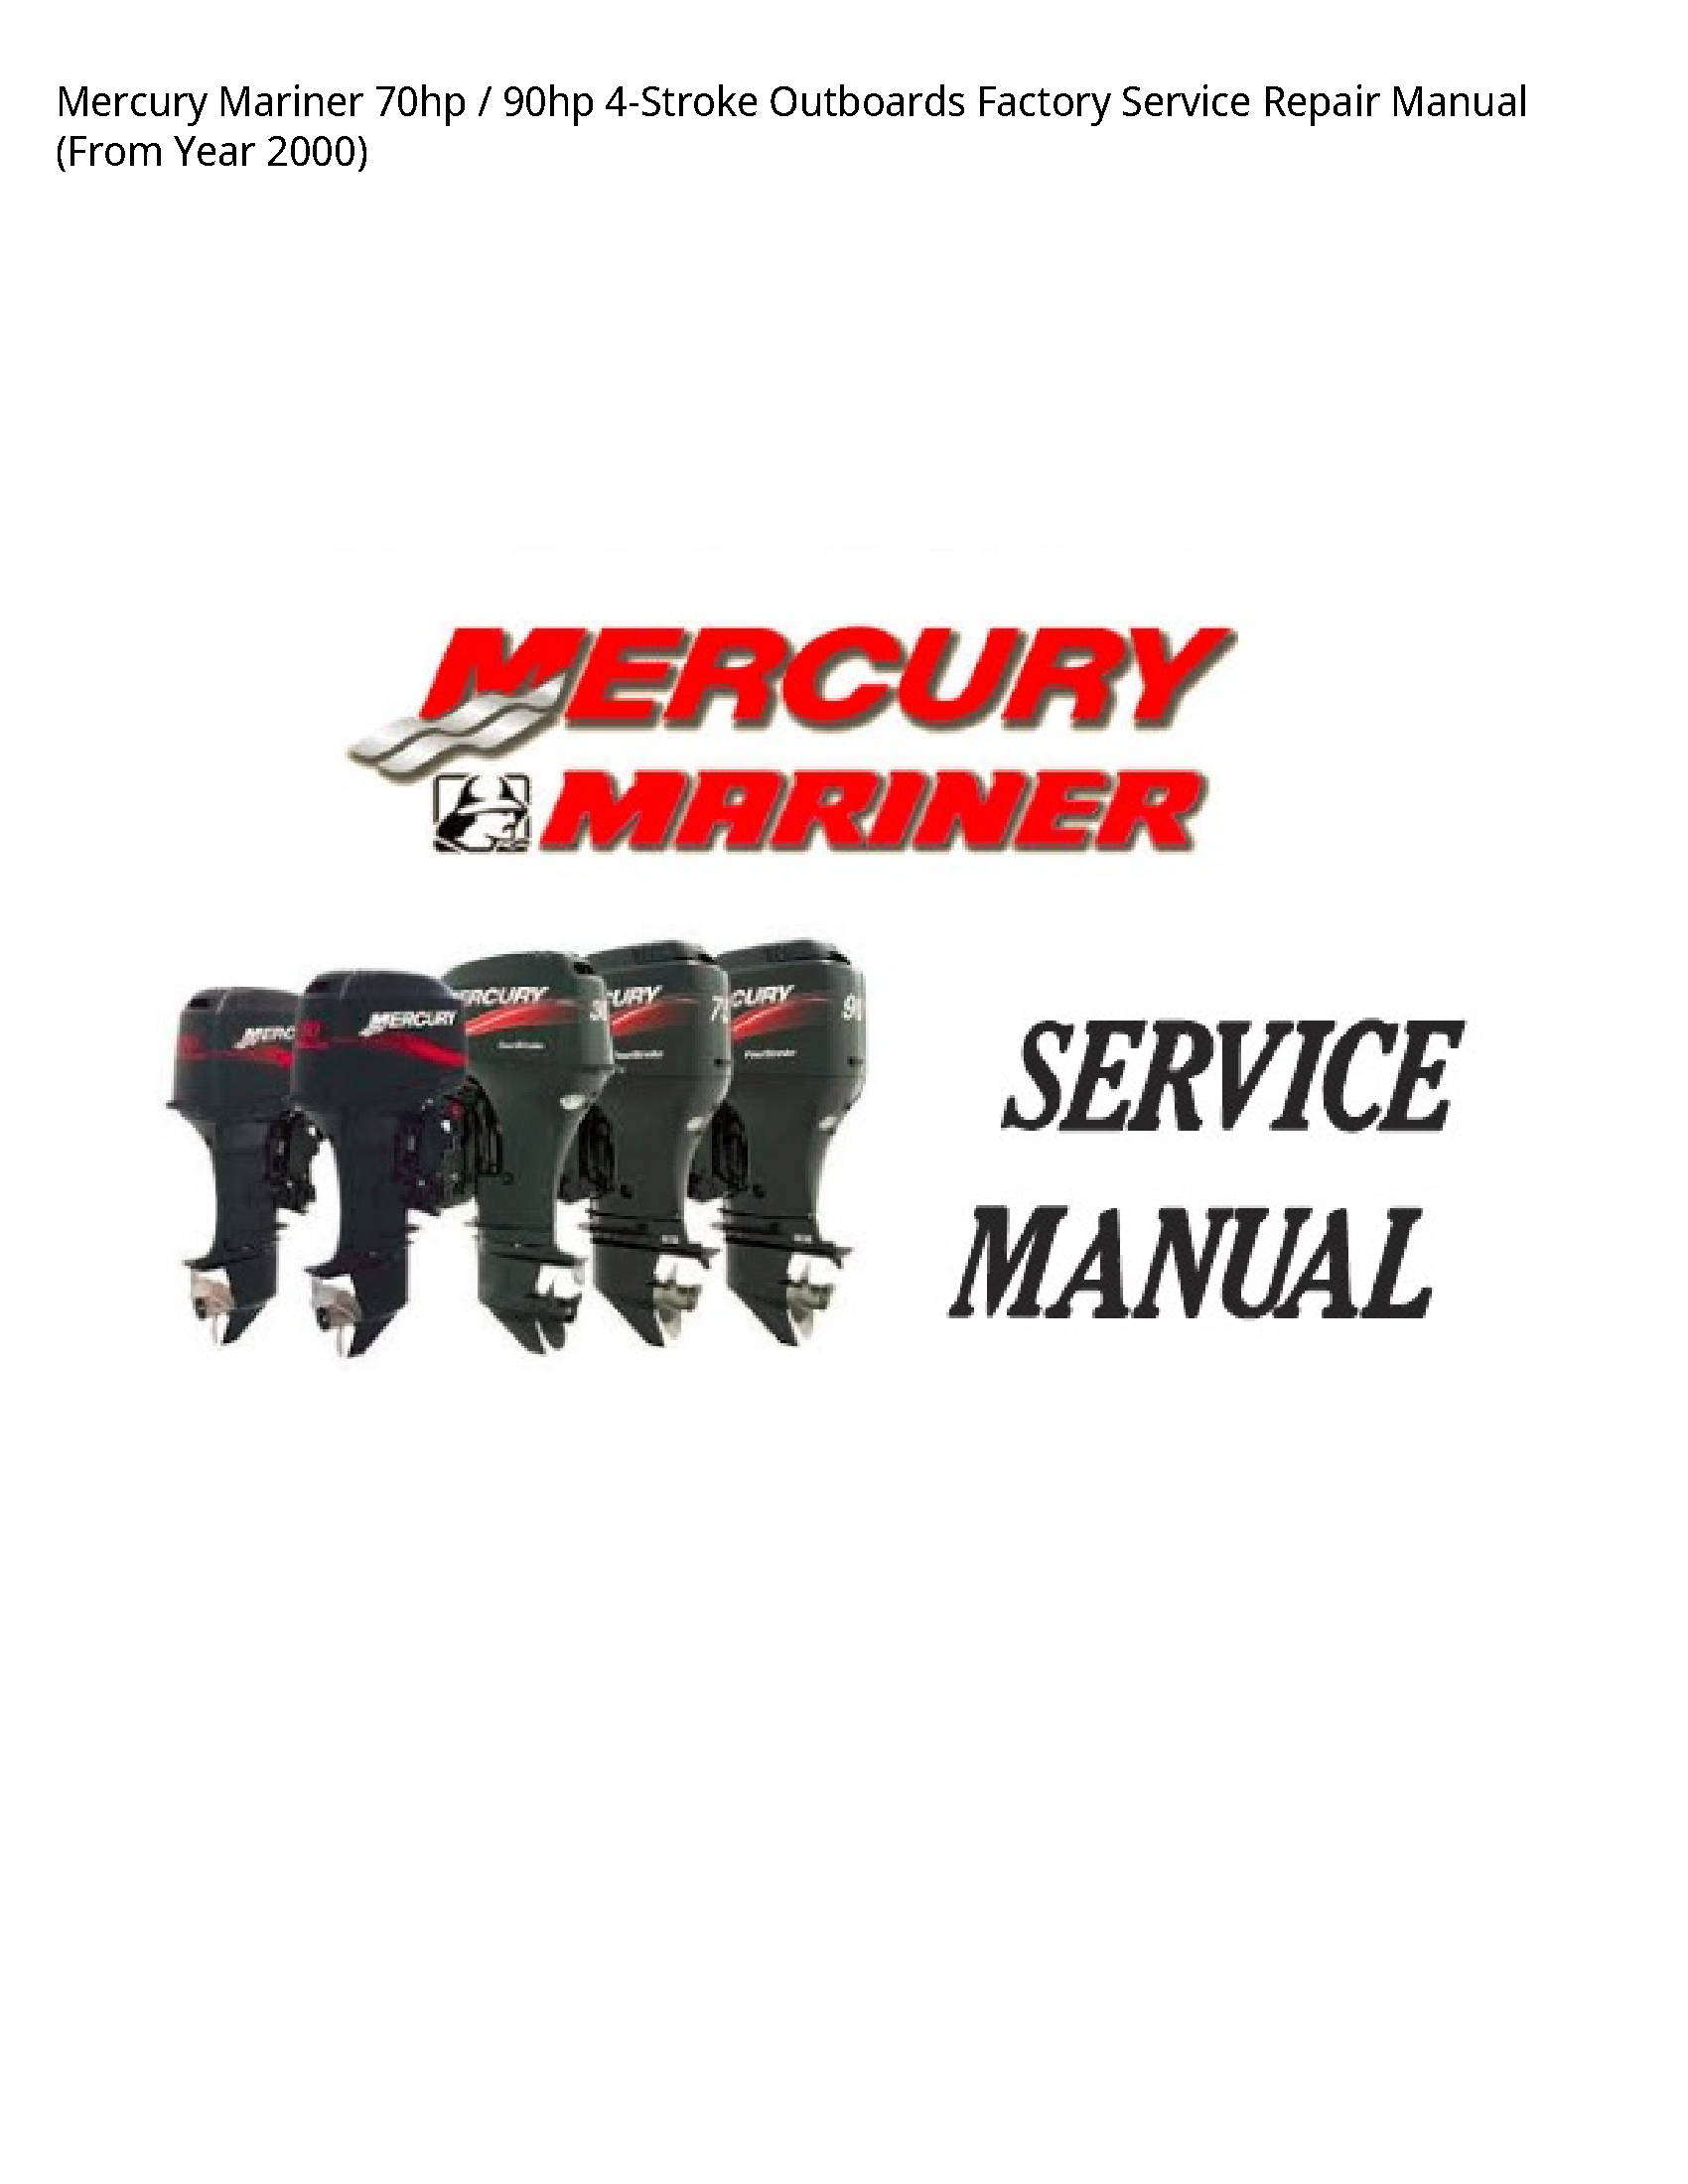 Mercury Mariner 70hp Outboards Factory manual